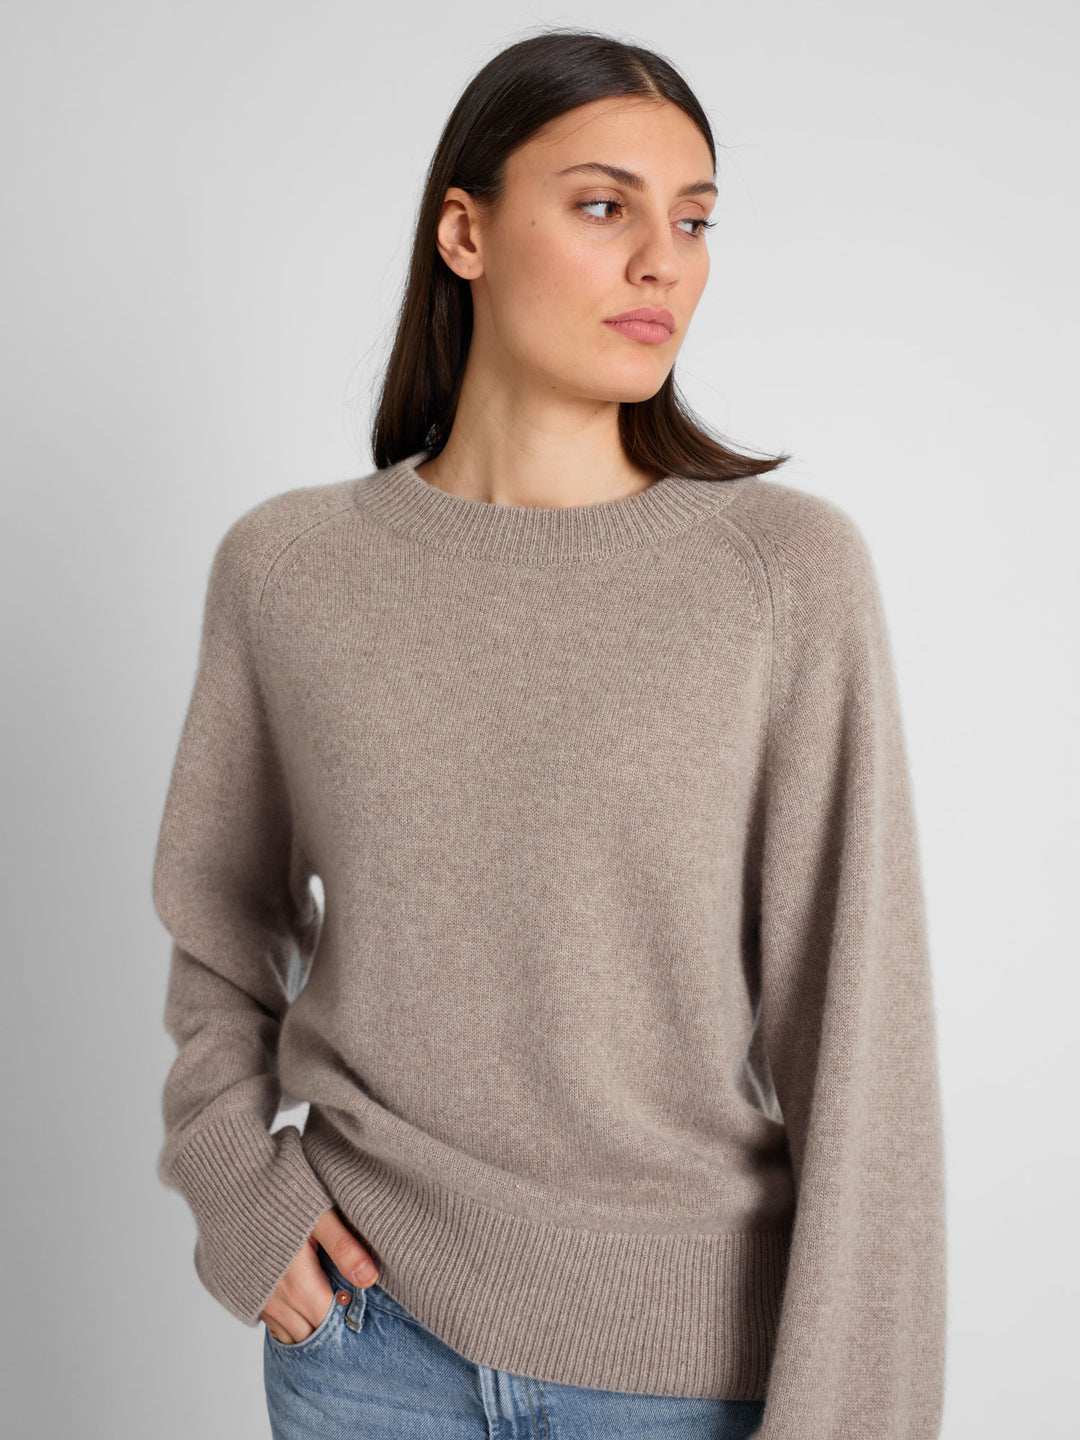 Chunky cashmere sweater "Signy" in 100% pure cashmere. Scandinavian design by Kashmina. Color: Toast.